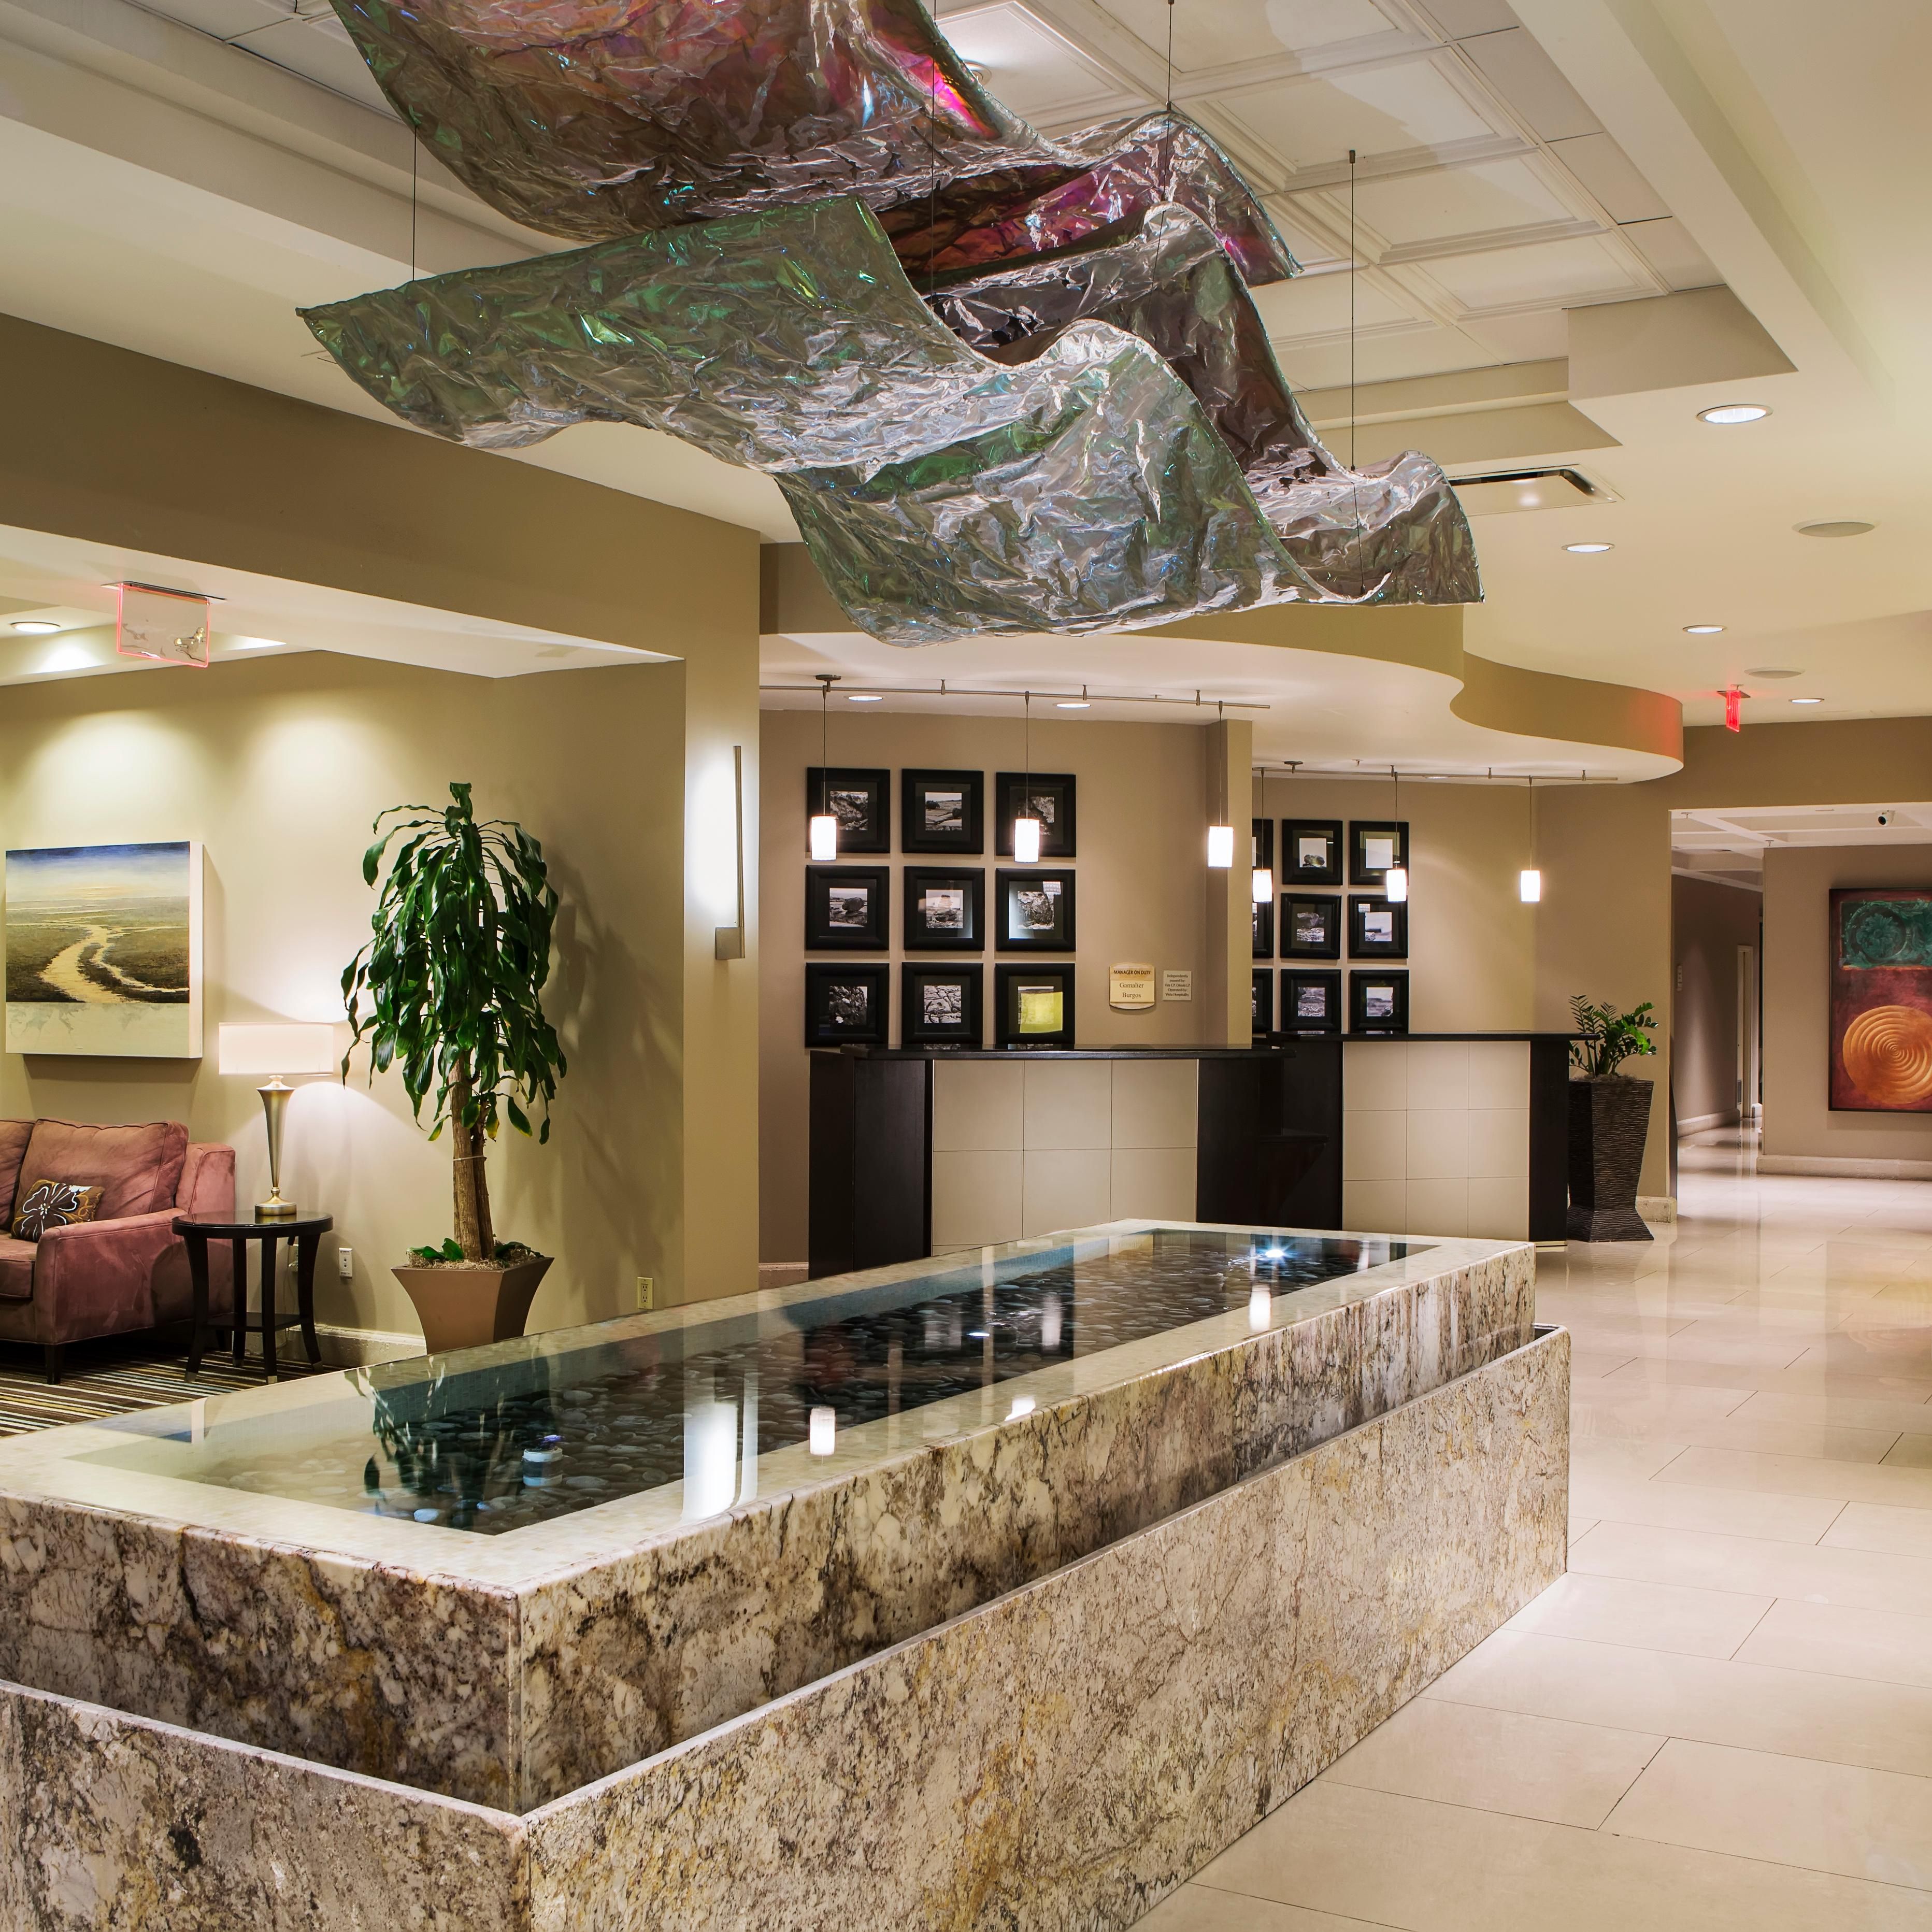 Enjoy and relax in the Crowne Plaza Orlando Dowtown hotel lobby